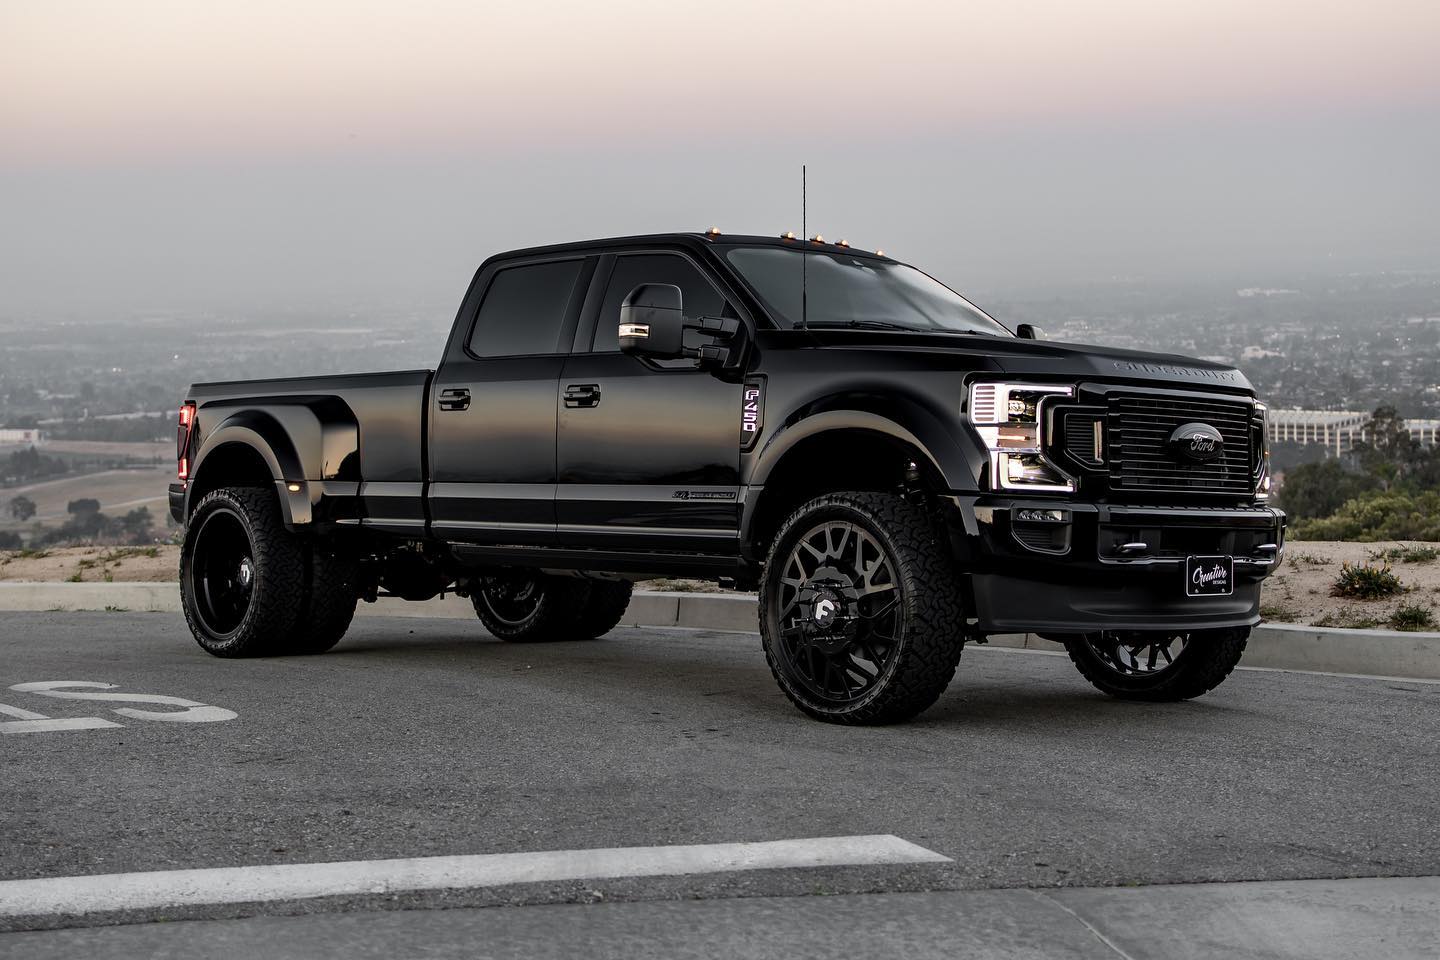 Crimson Ford Mustang and Murdered-Out F-450 Easily Show Why Custom Leads  the Way - autoevolution